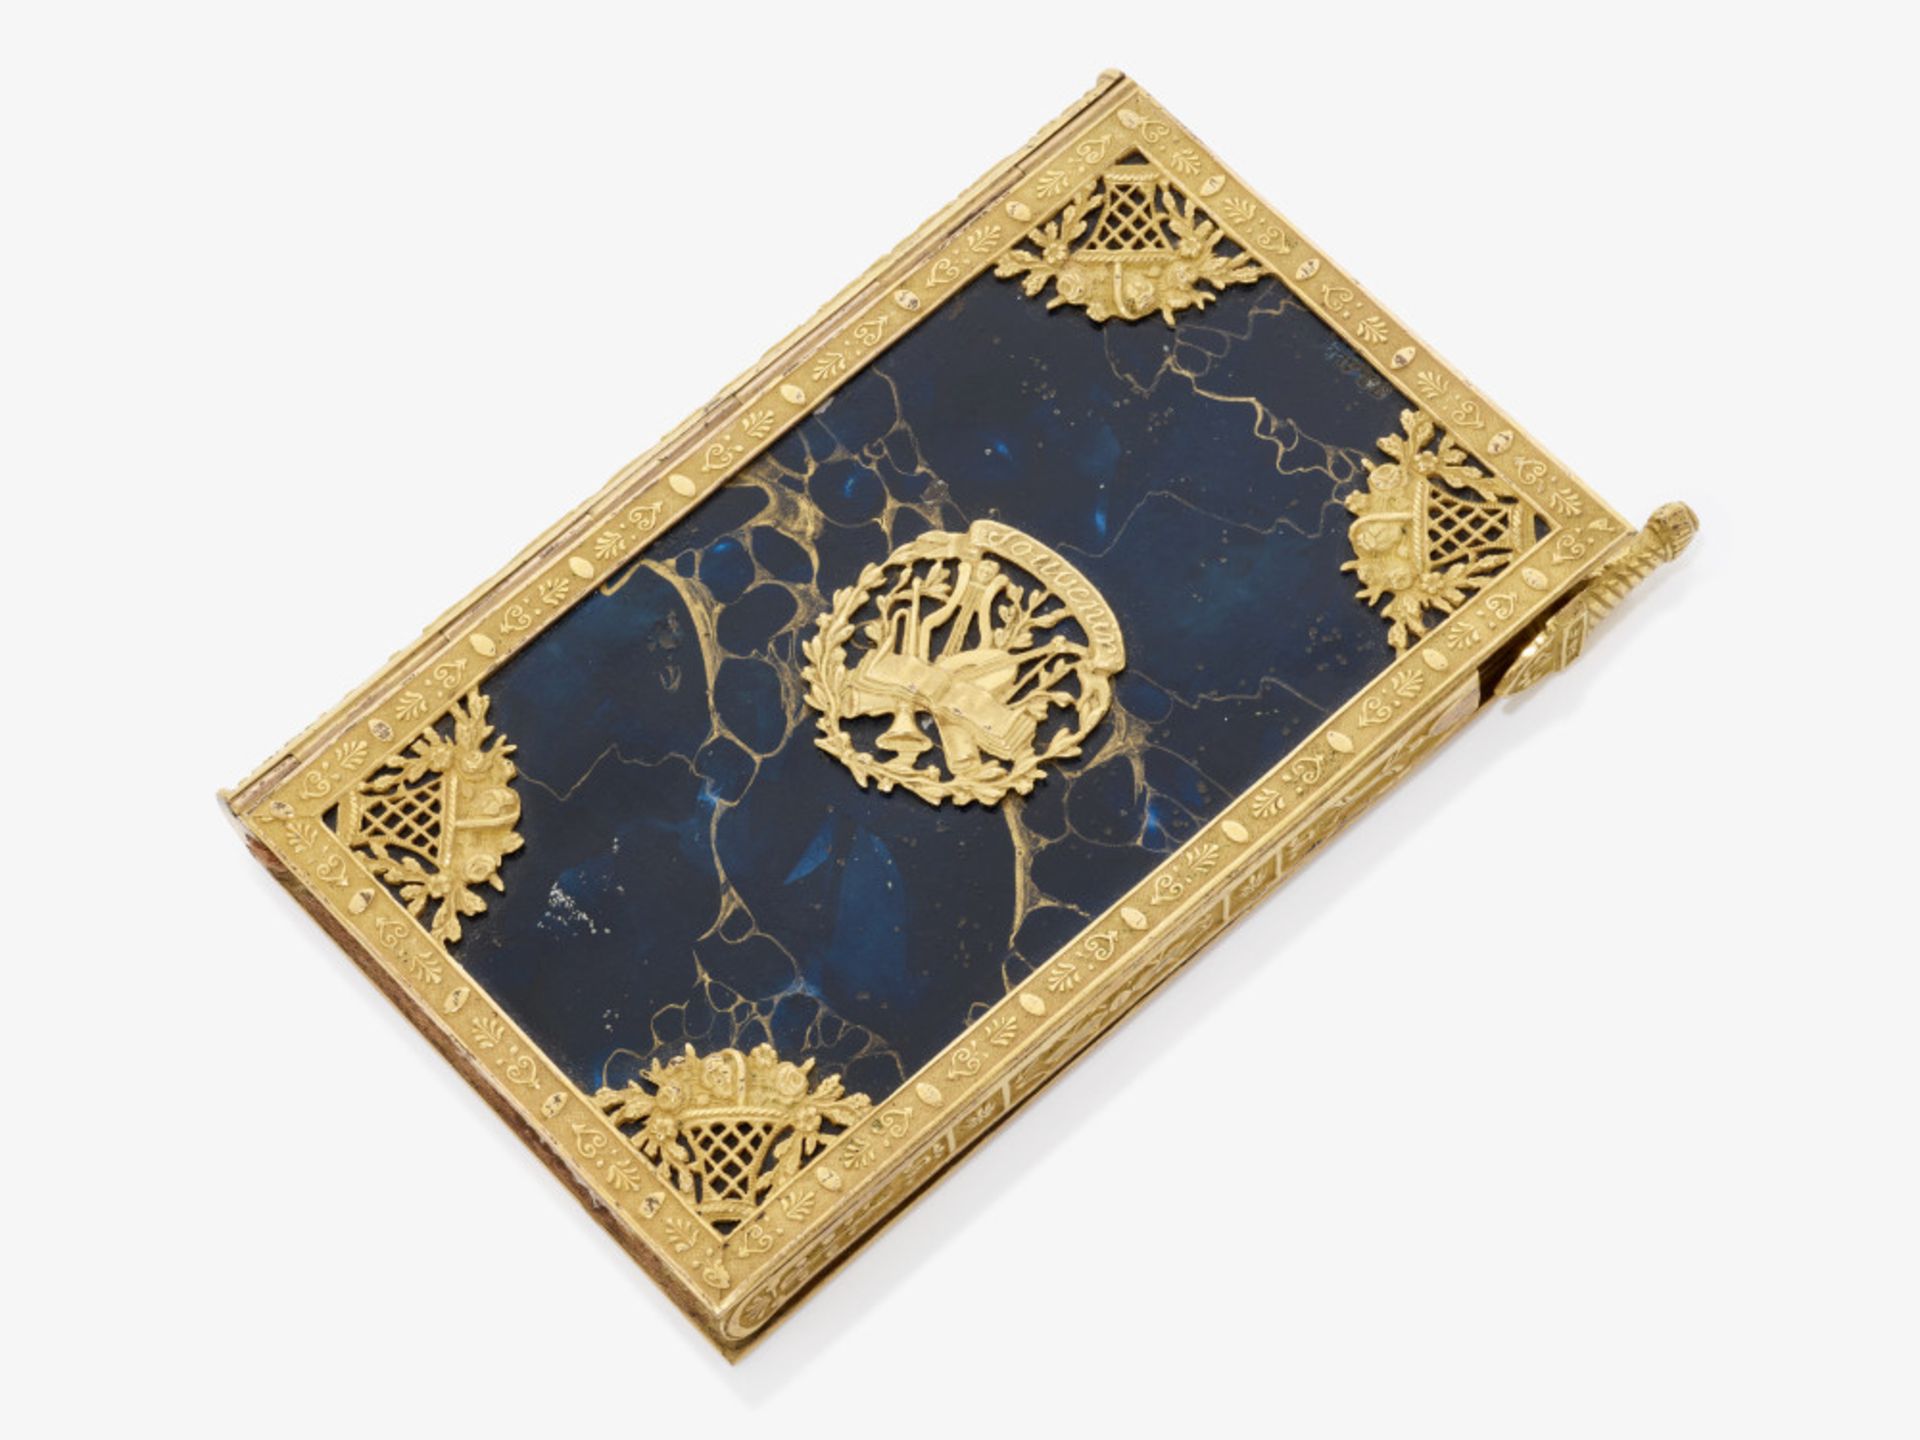 A notebook with days of the week and wallet as souvenir - France, late 19th century